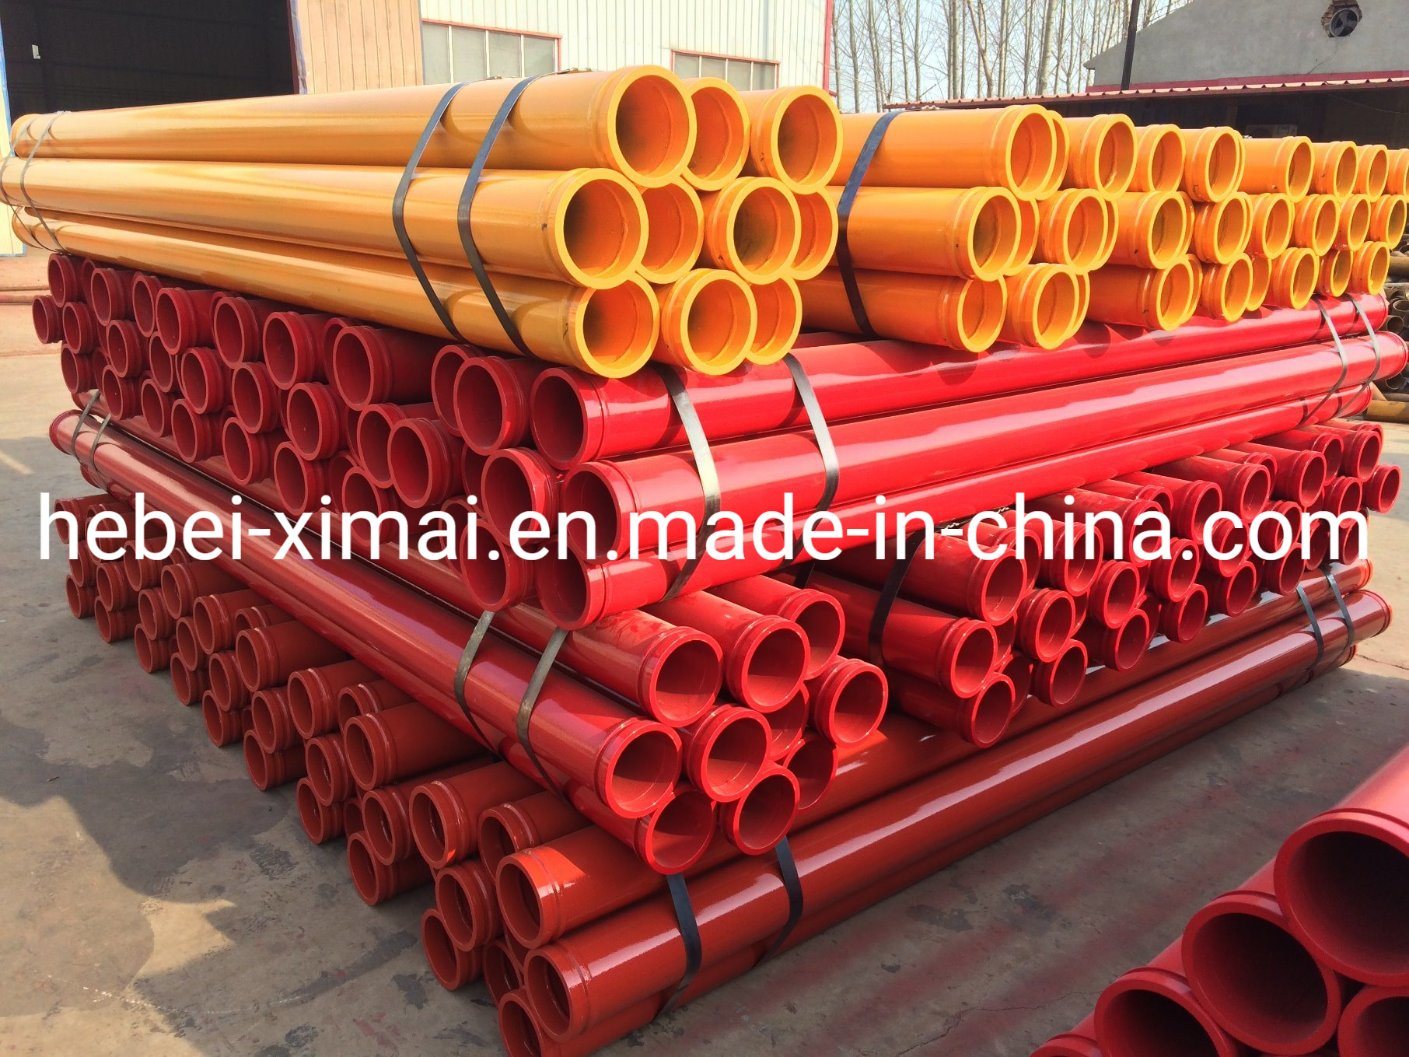 professional factory for Lay Flat Hose - Hebei Ximai Machinery Hardened Single Wall Boom Pipe (DN125 6.35mm) – Ximai